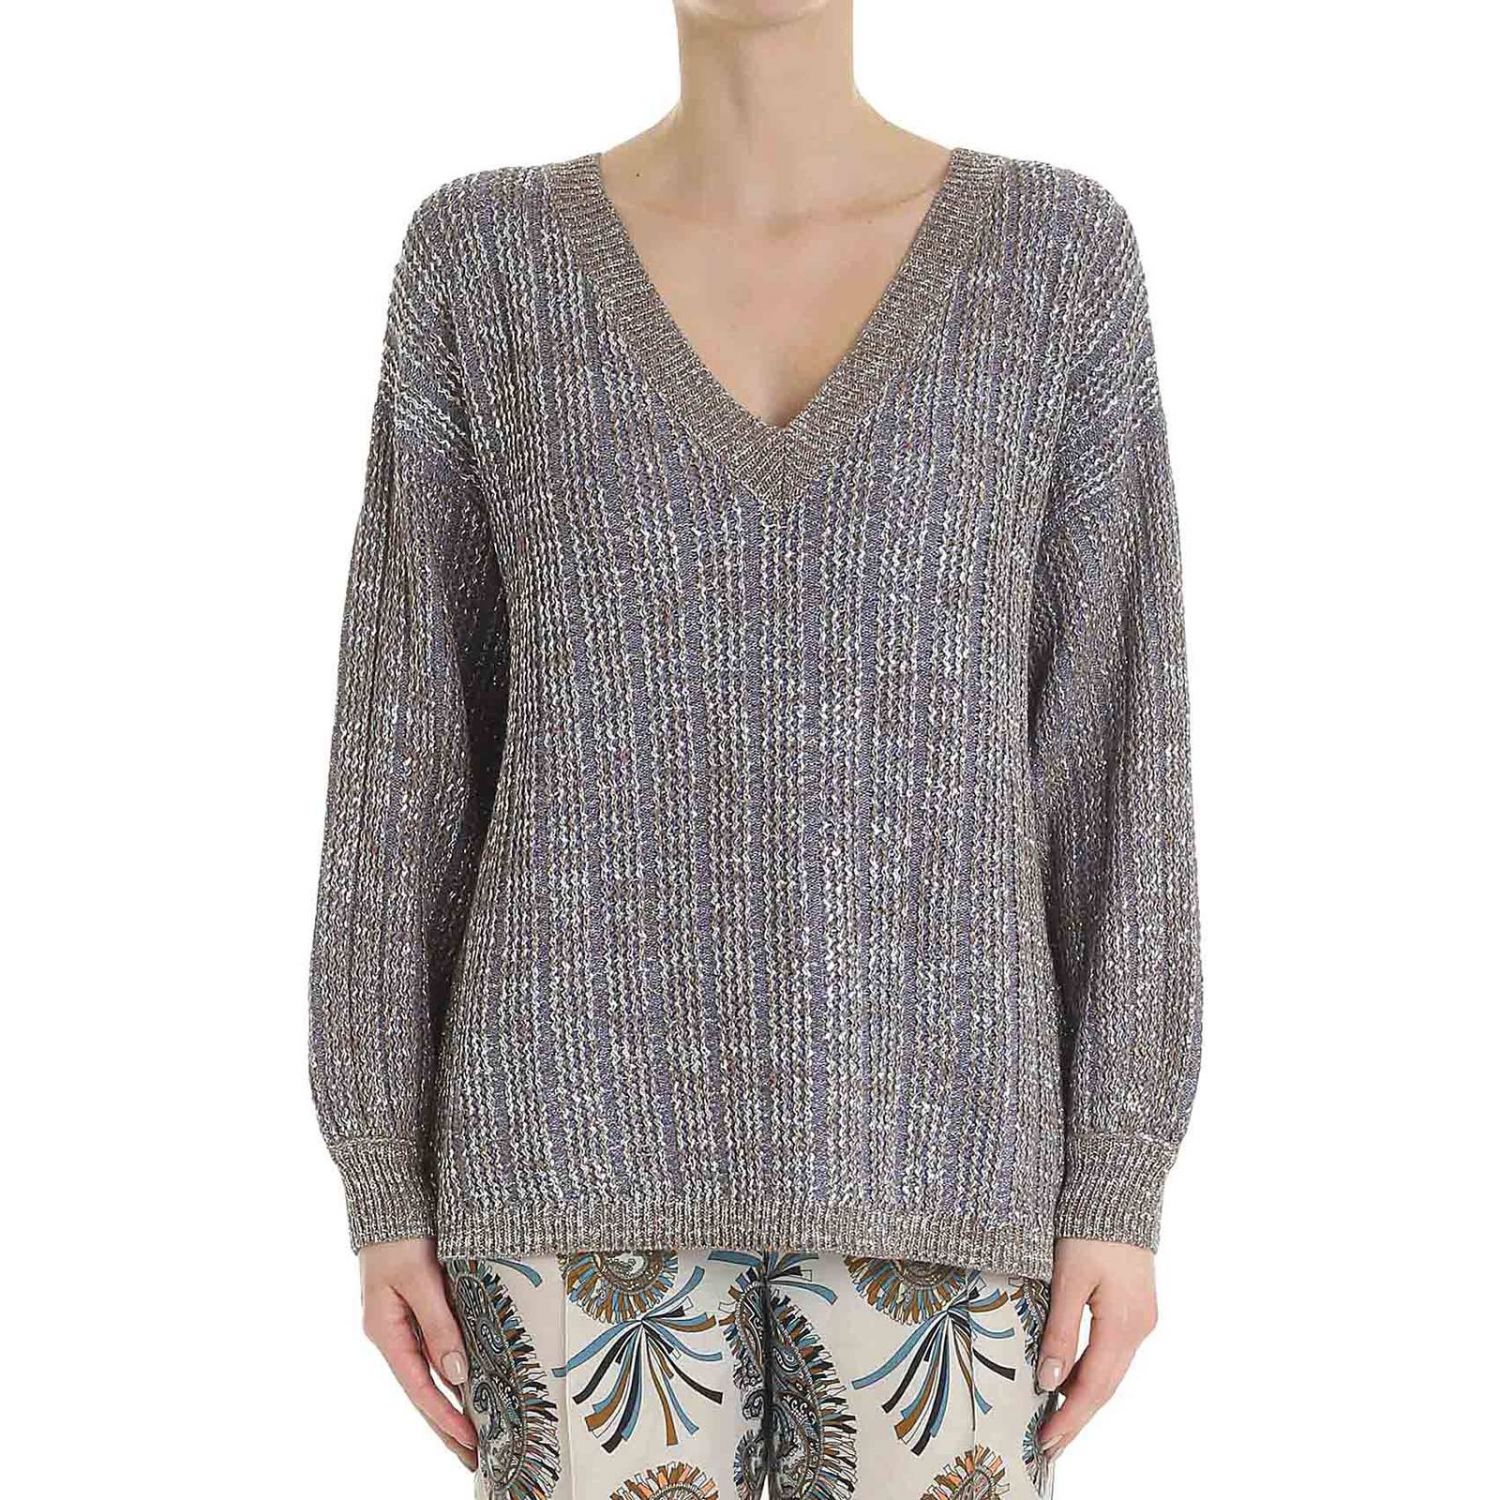 Etro Outlet: Sweater women - Blue | Sweater Etro 15338 9787 GIGLIO.COM